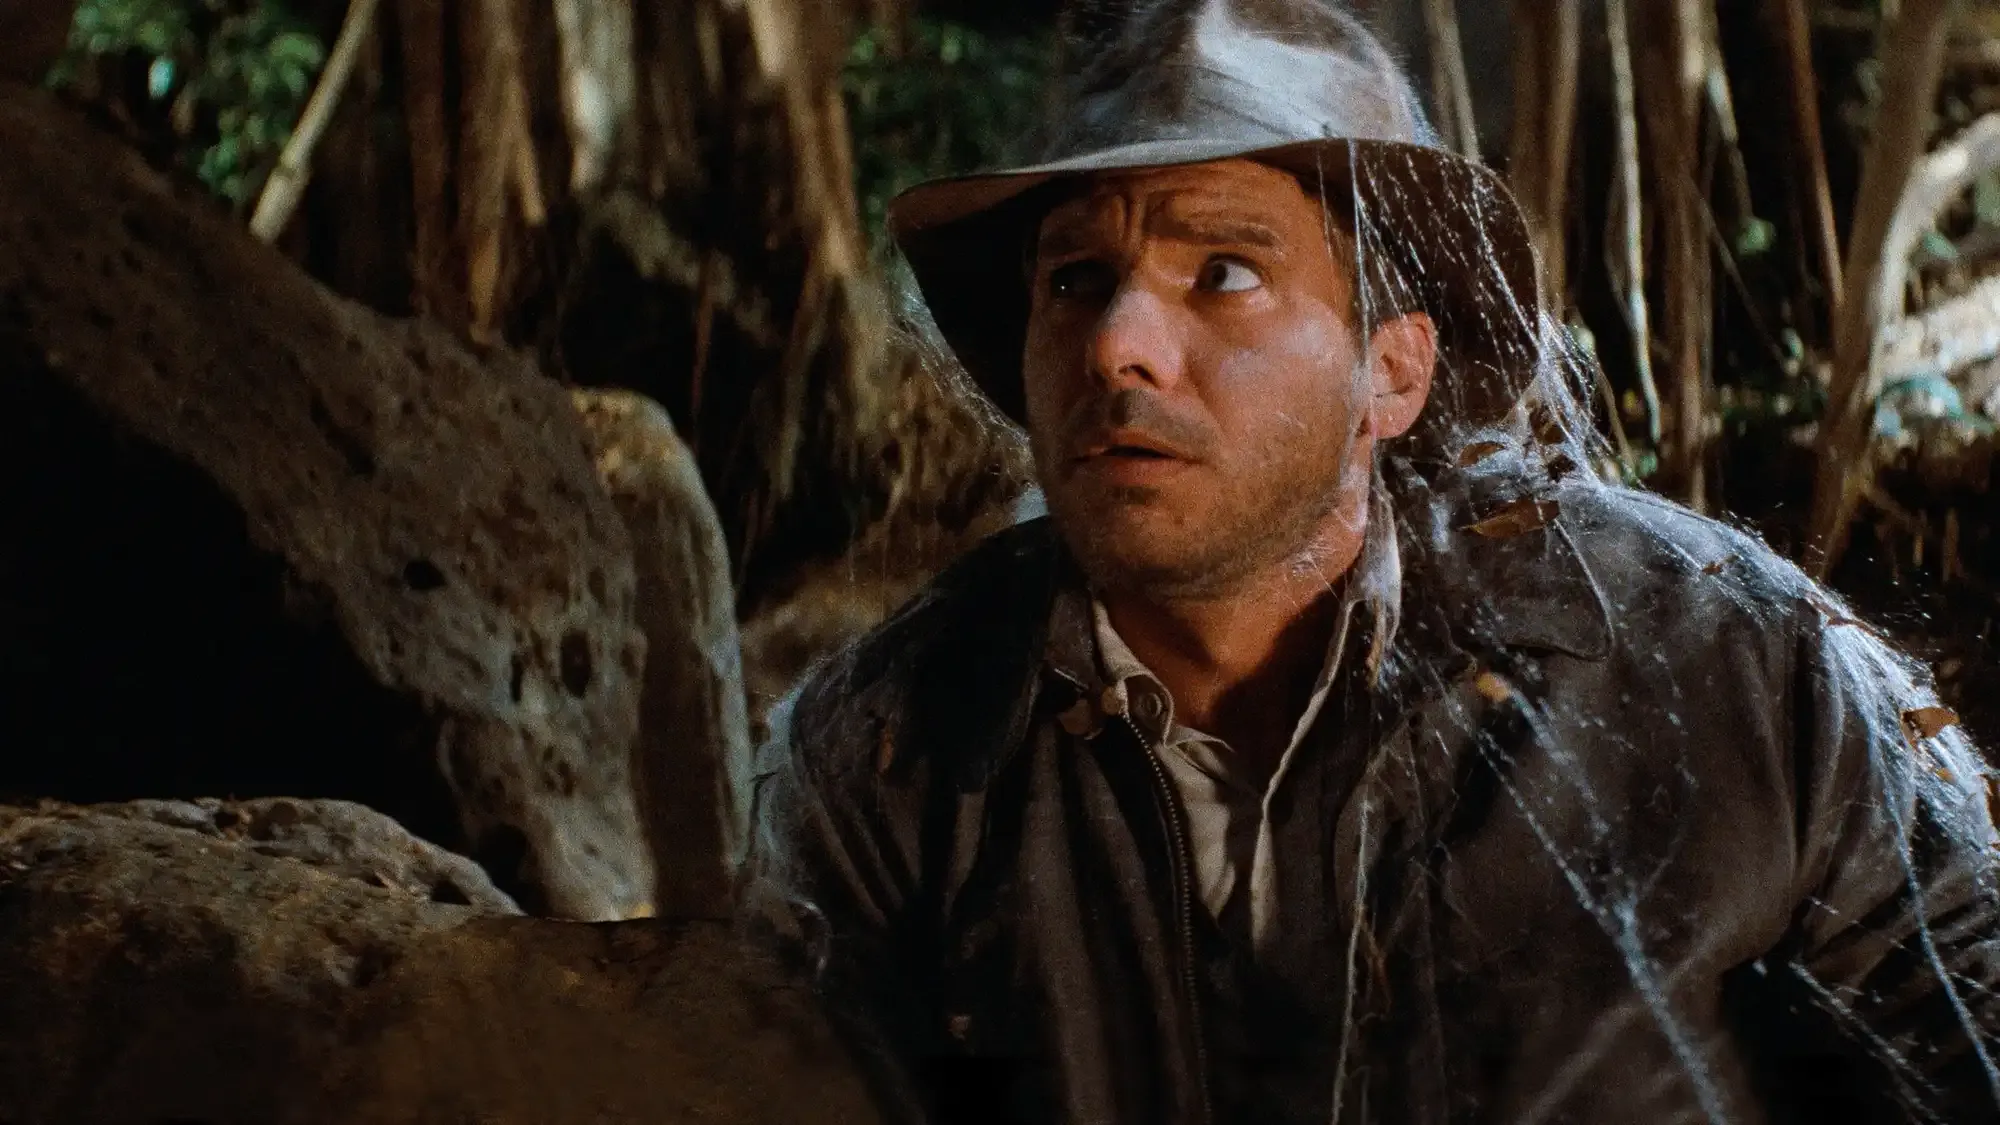 Raiders of the Lost Ark movie review